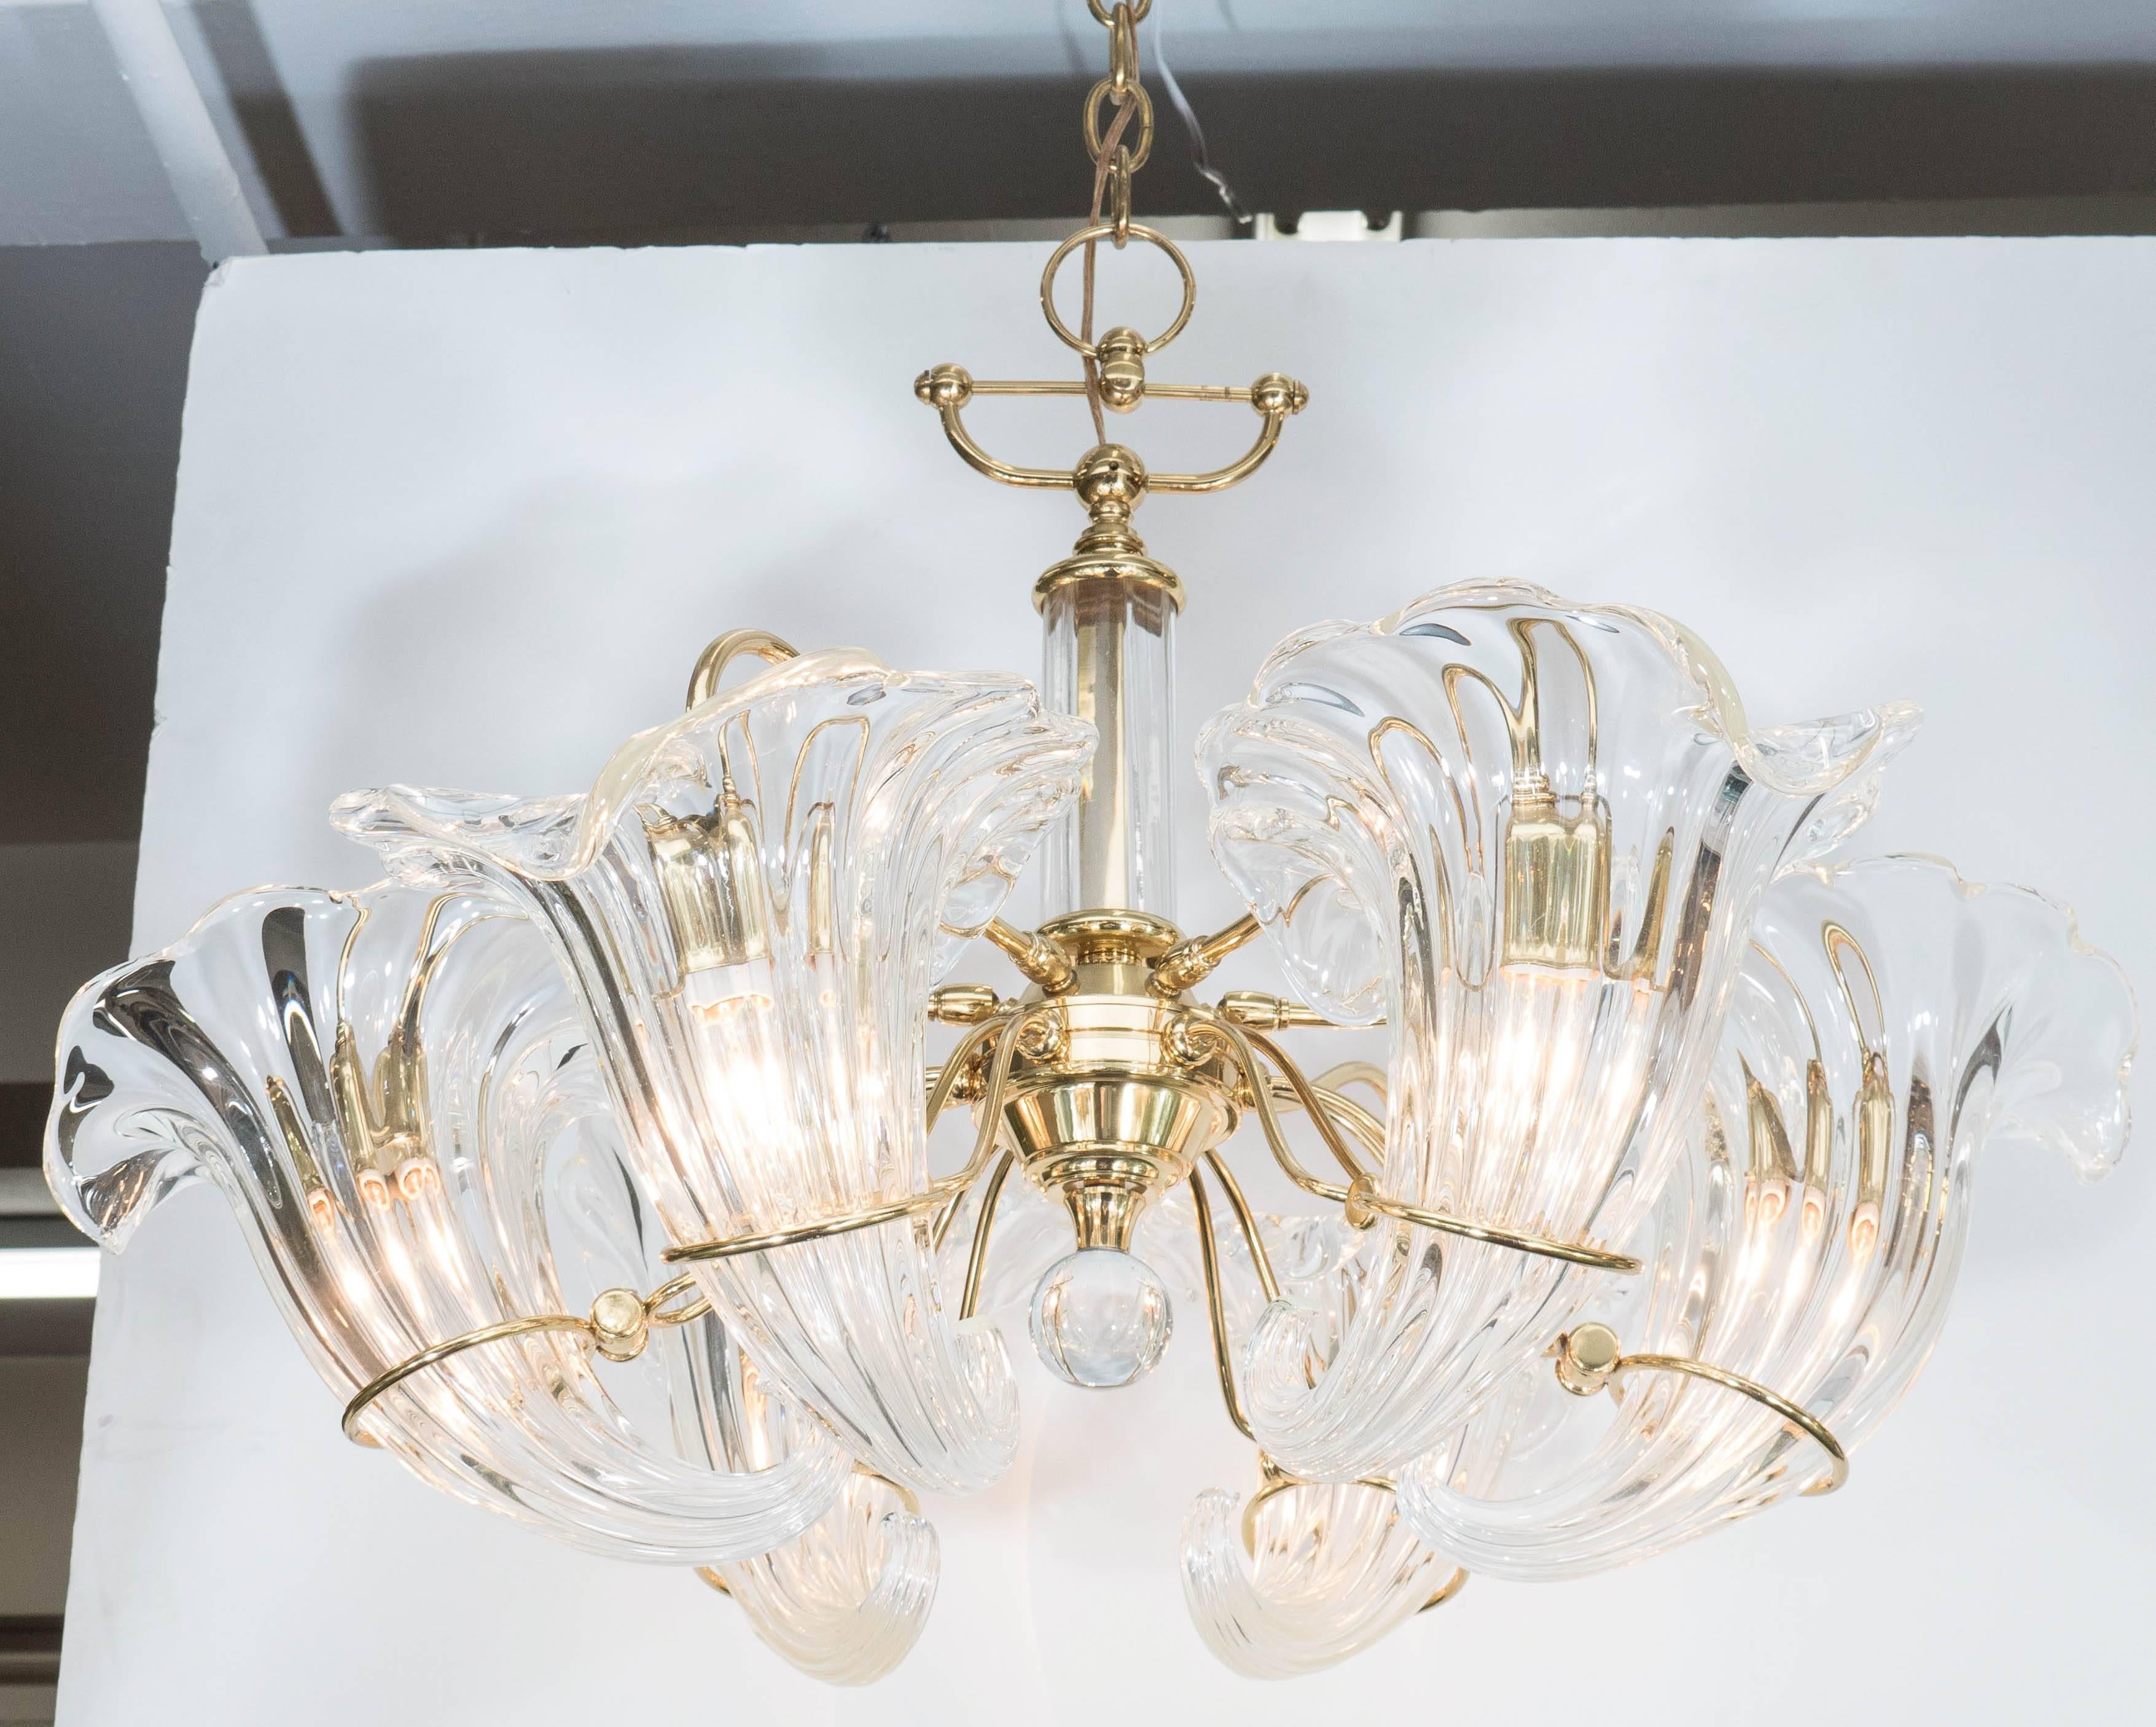 A vintage six-light Italian chandelier, designed circa 1970s by Franco Luce, the frame in beautifully polished brass, with crystal ball finial, and clear Murano glass cornucopia inserts as shades. Wiring and sockets to US standard, requires six